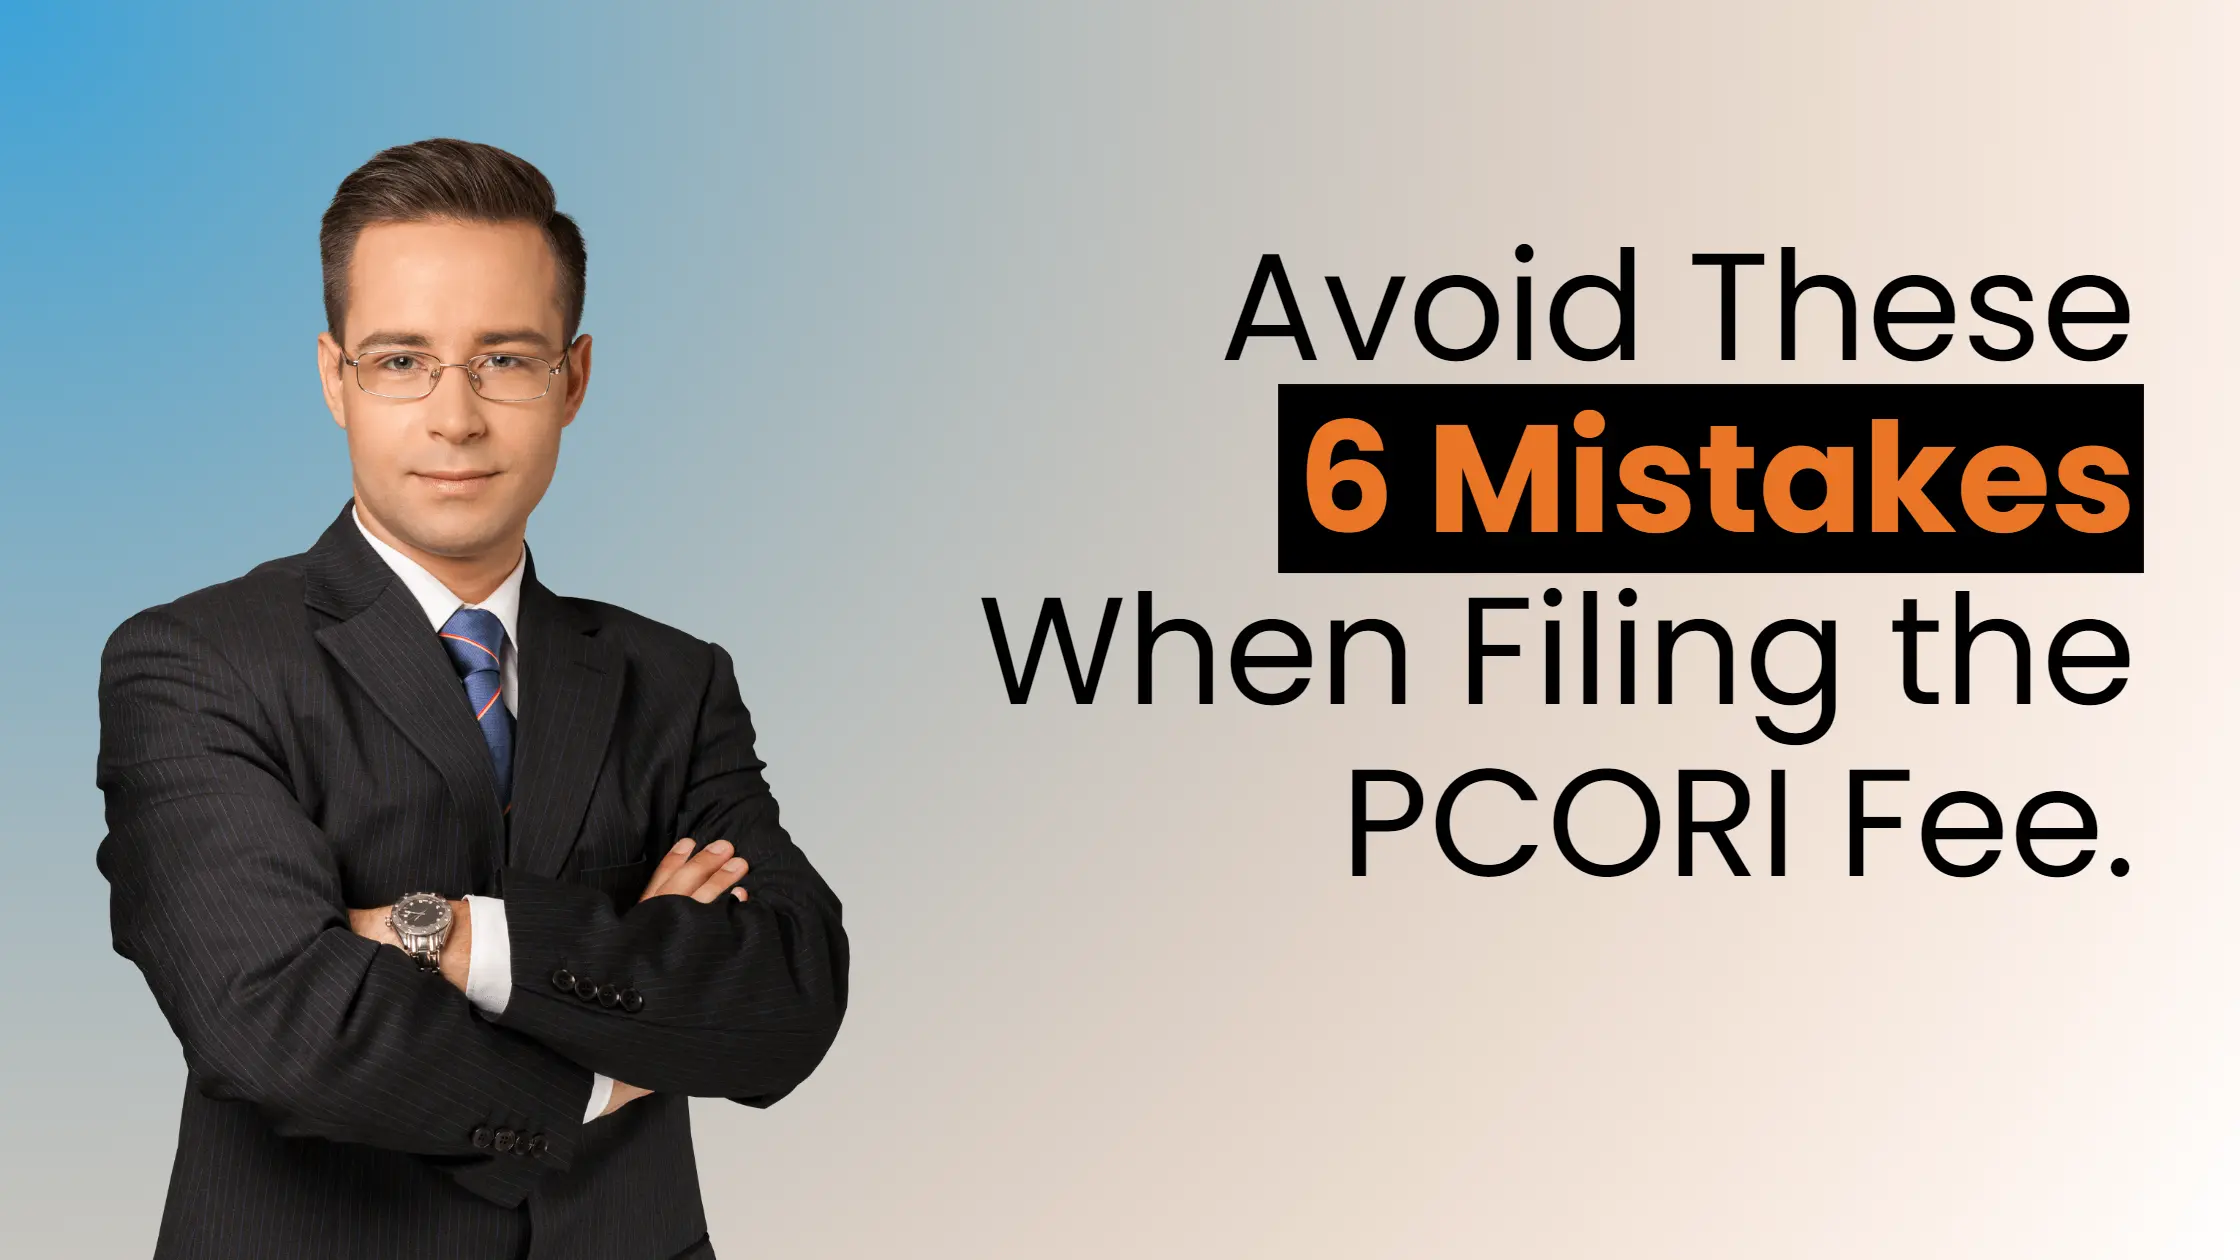 Avoid These 6 Mistakes When Filing the PCORI Fee